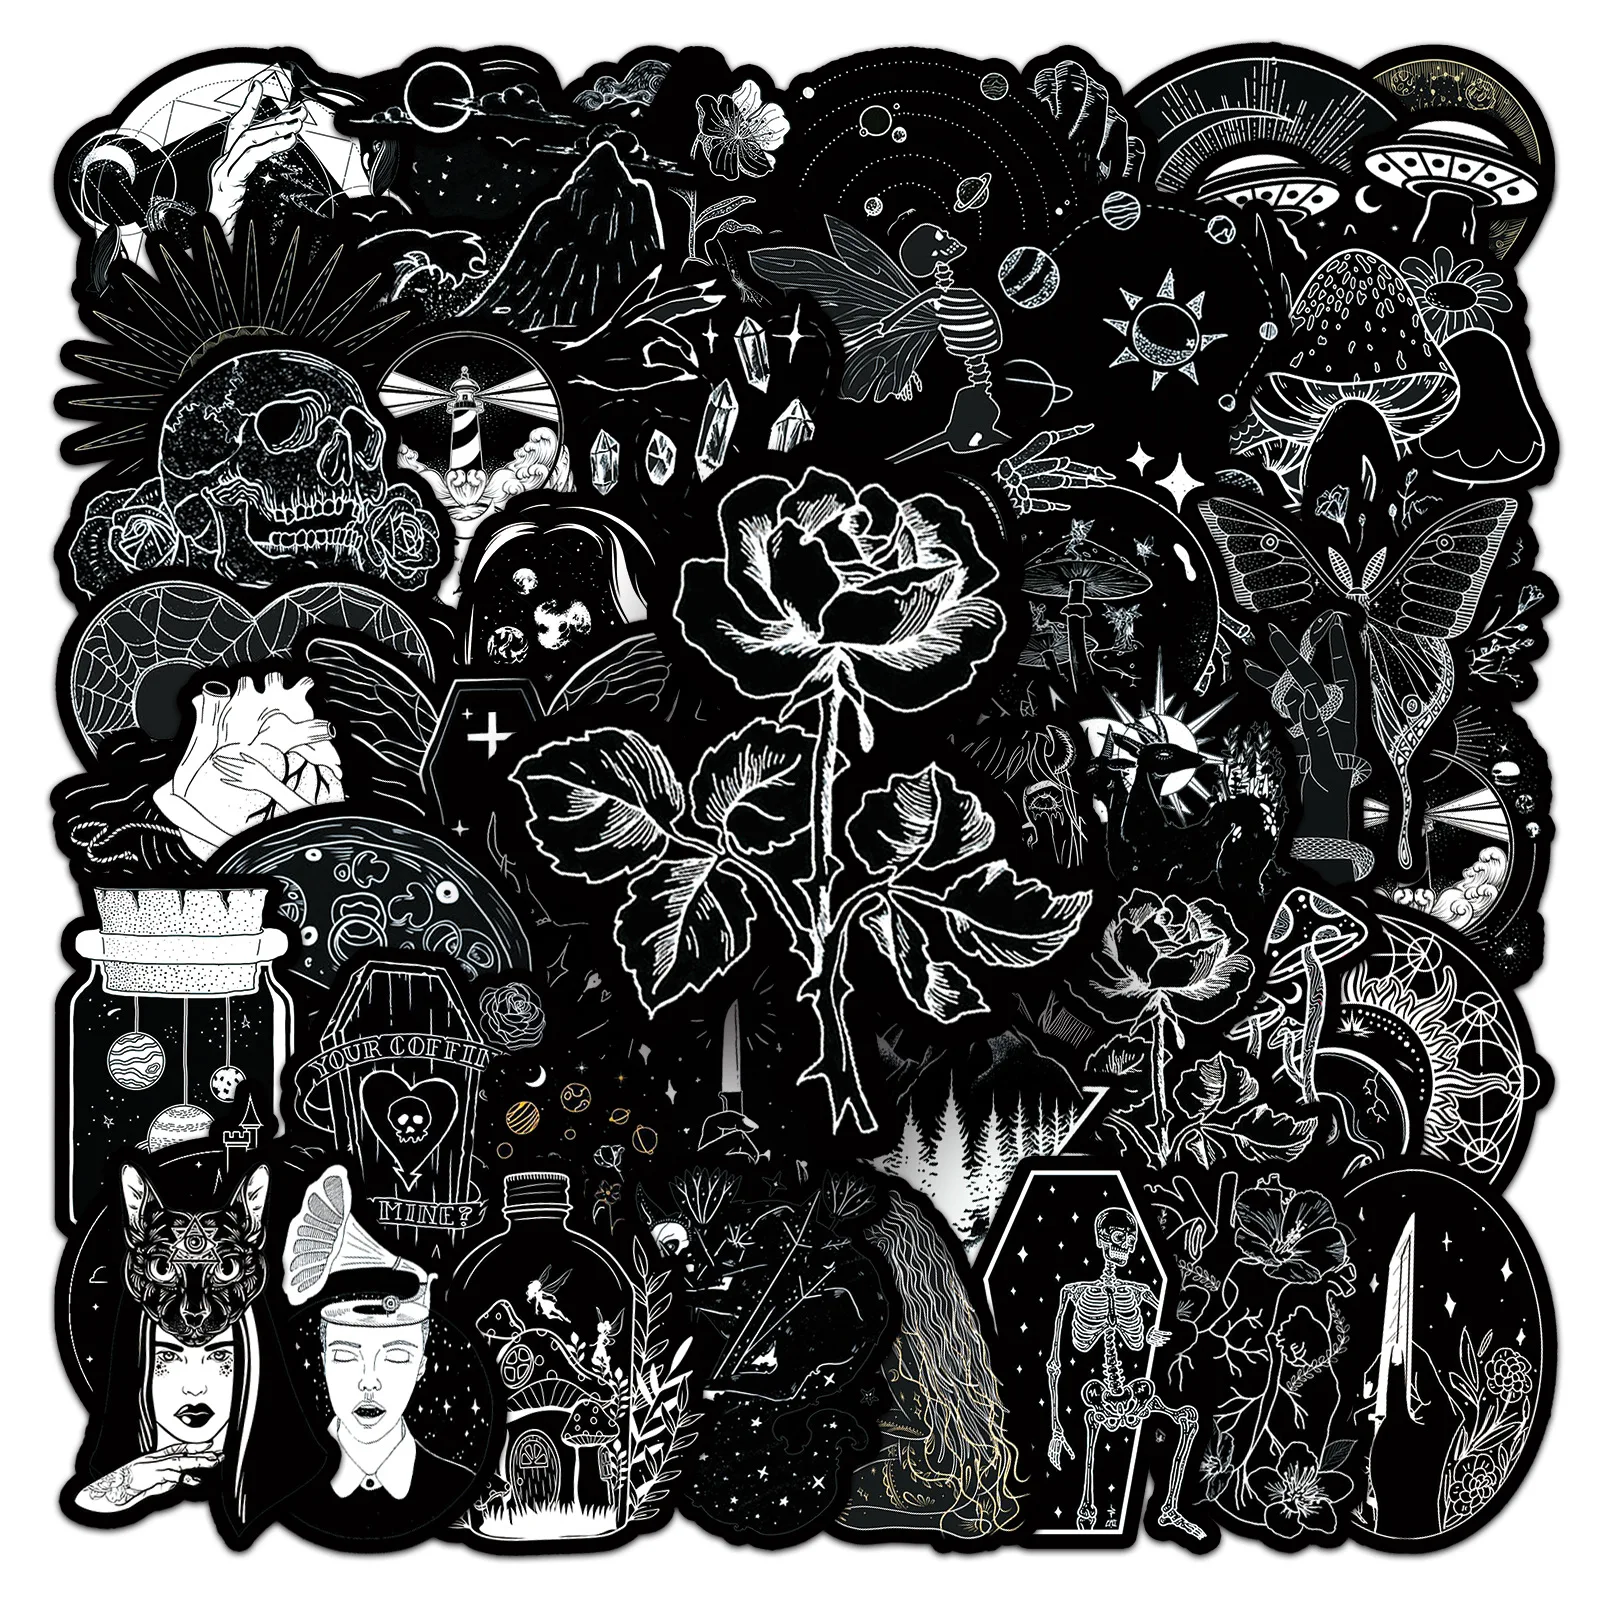 10/50Pcs Black White Art Gothic Graffiti Stickers Aesthetics DIY Scrapbook Guitar Diary Car Waterproof Skull Decals Decoration washi tape diy paper tape gothic style wrapping tape roll scrapbook diary gift projects